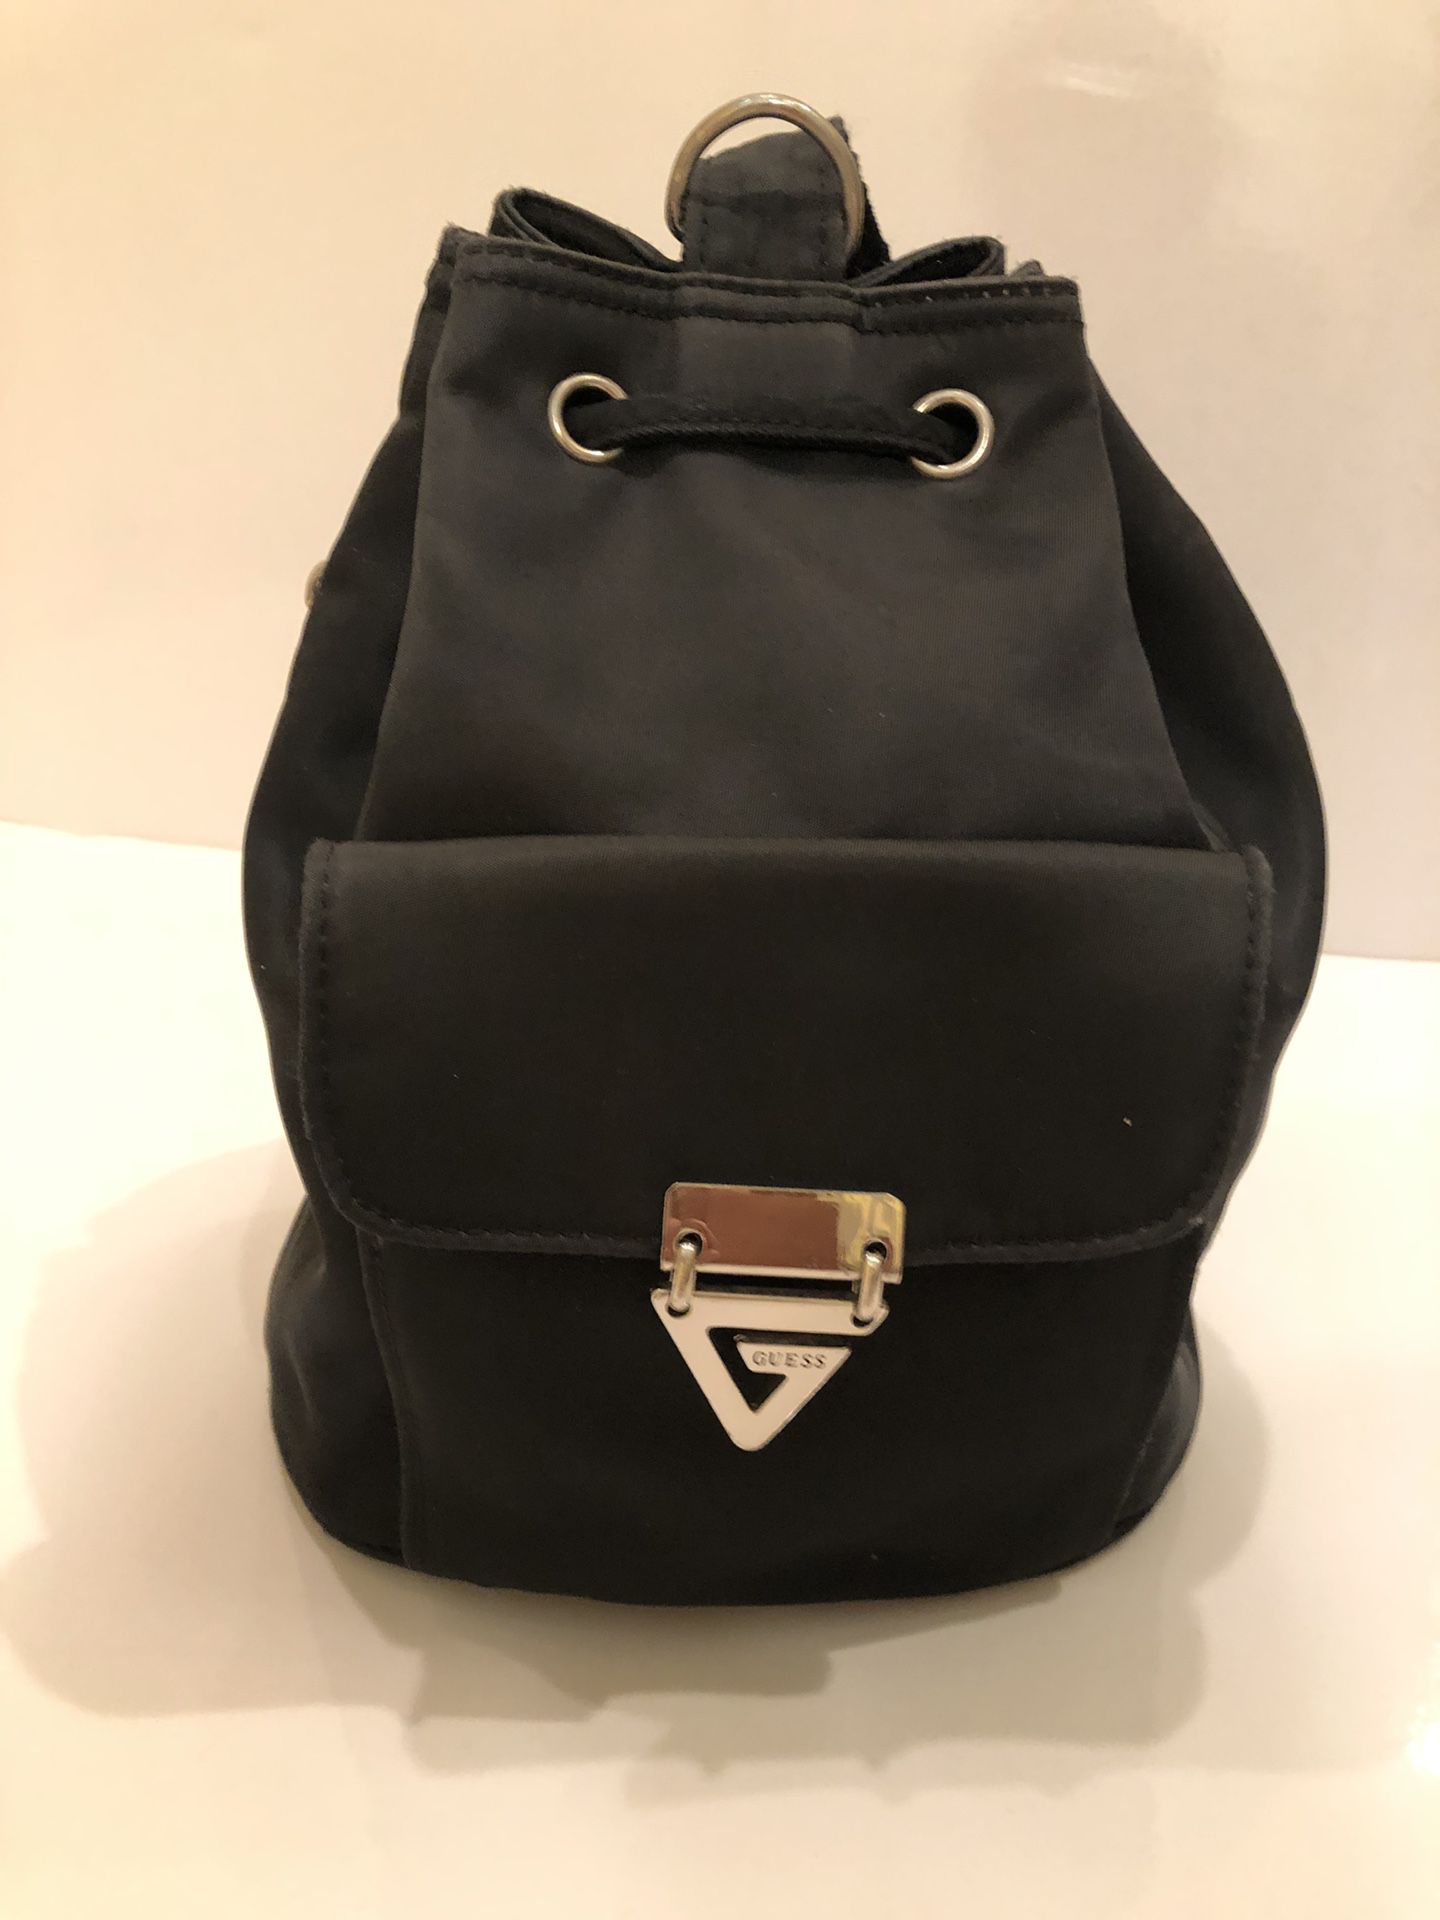 Vintage Guess Backpack from the 90’s